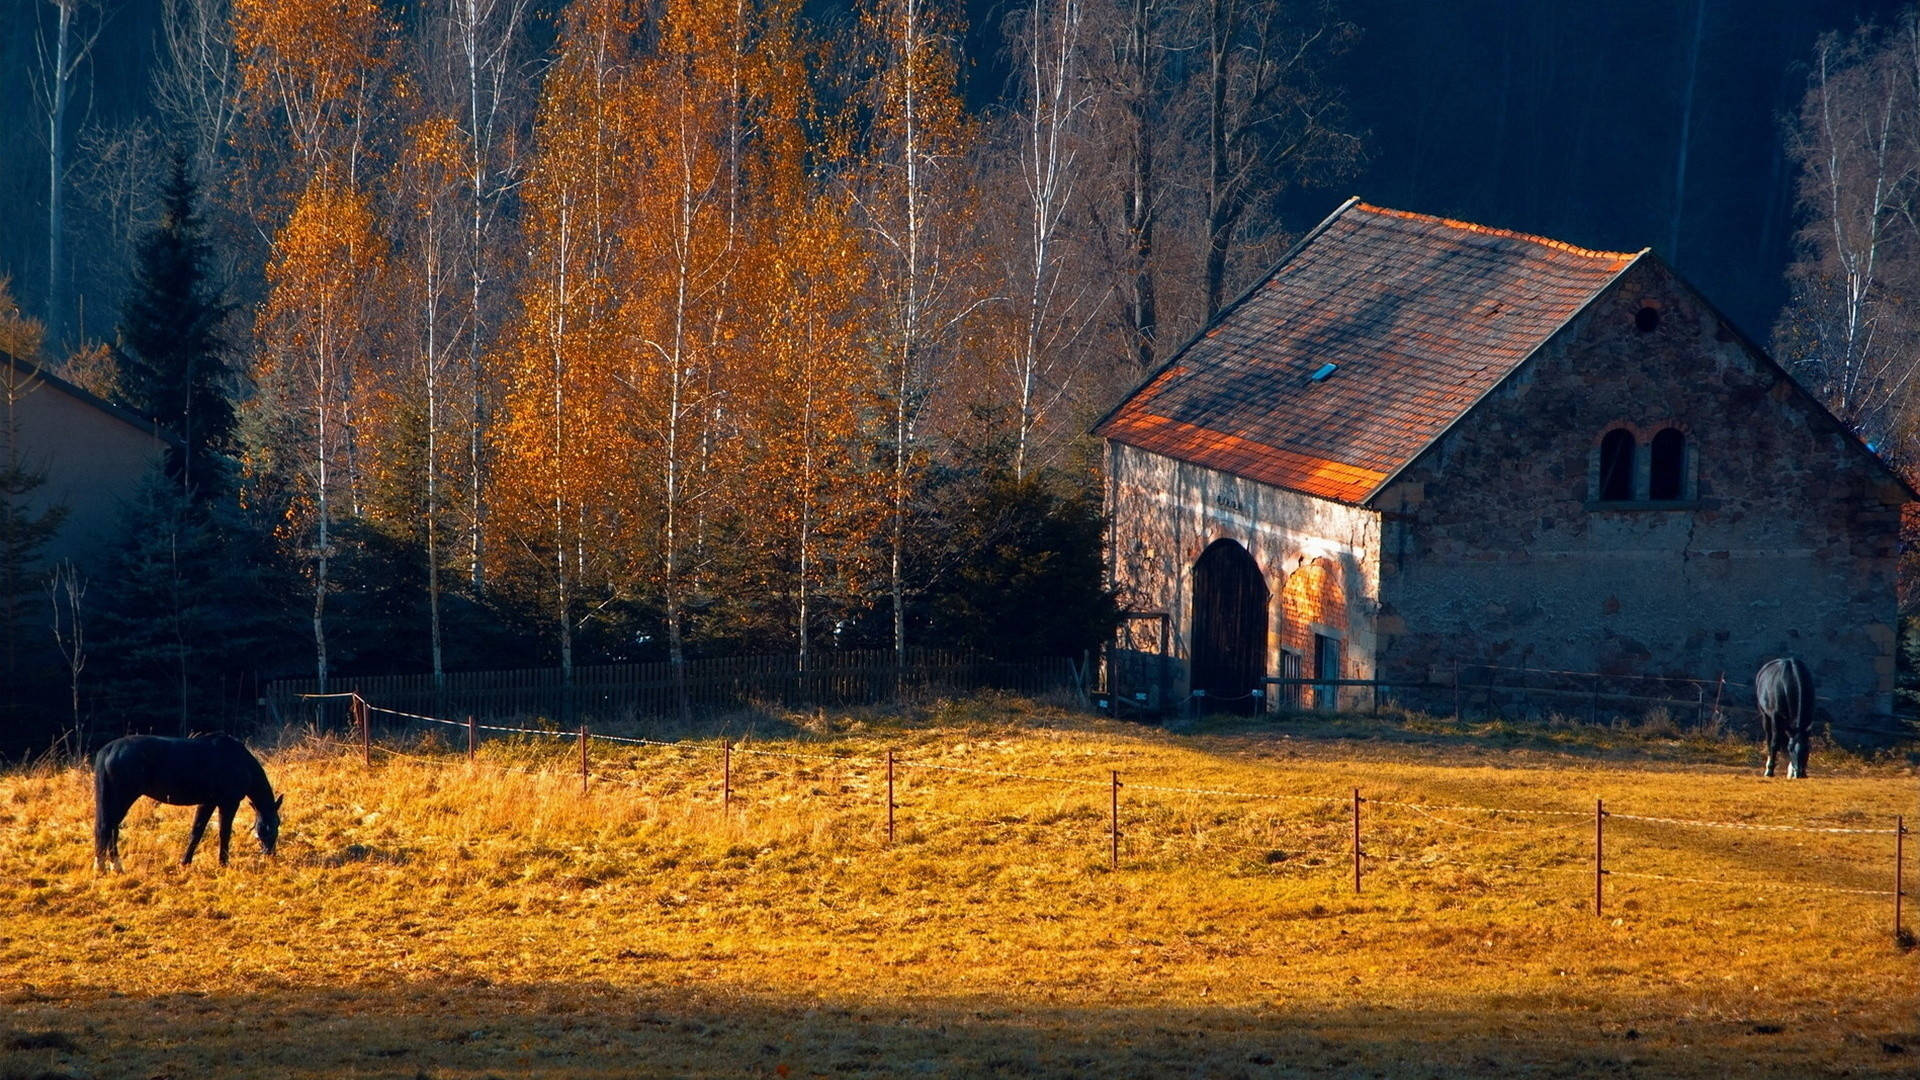 Rustic Fall Scenery With Barn Background